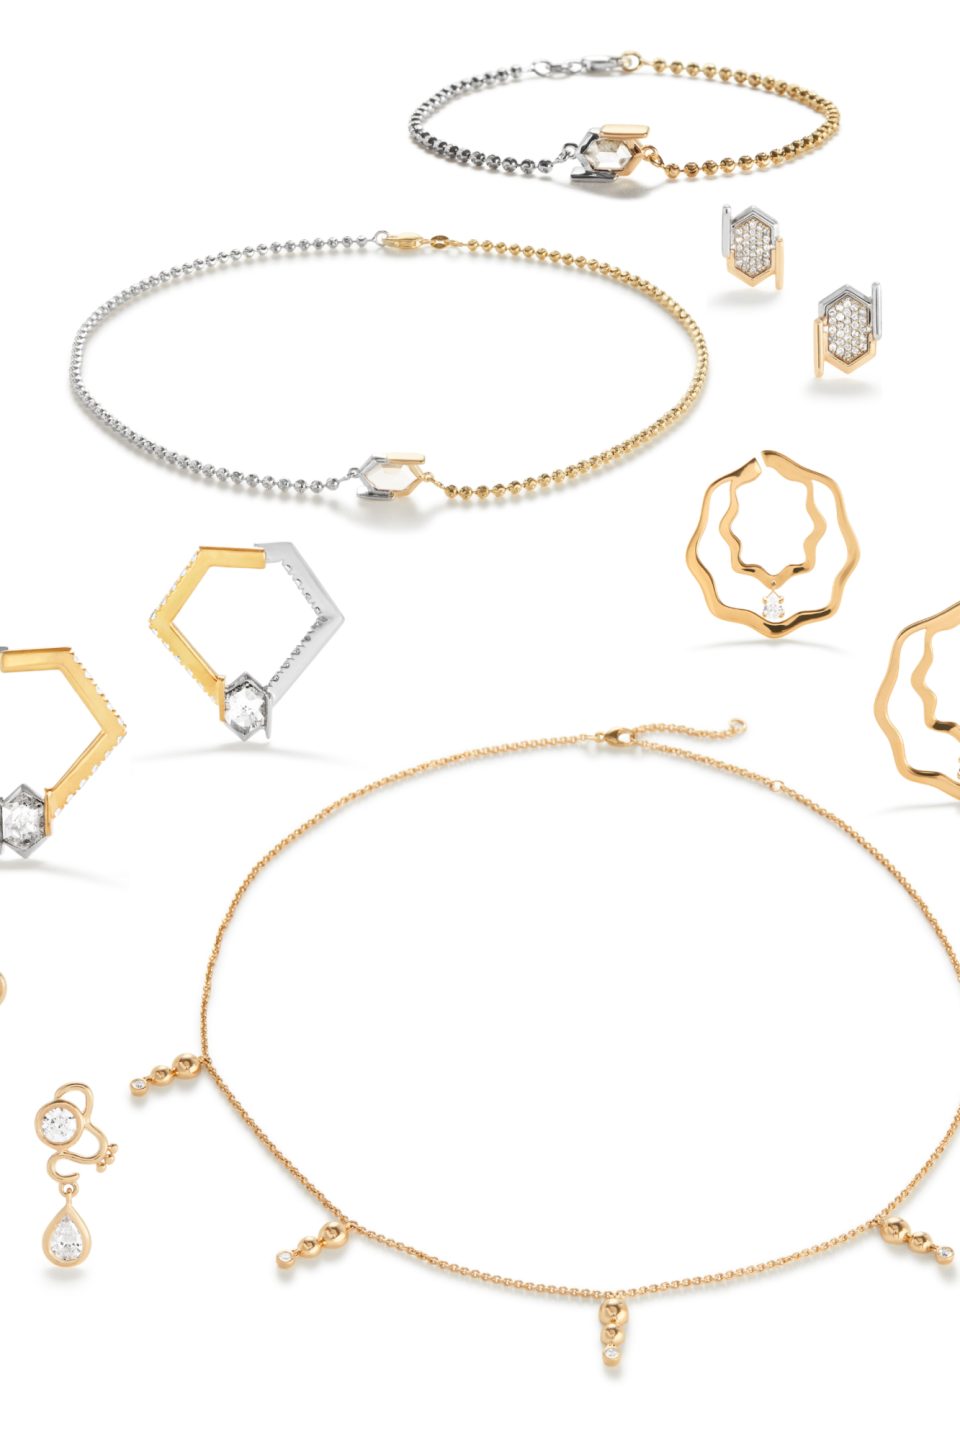 Meet 6 Buzzy Jewelers Tapped by Lorraine Schwartz and the Natural Diamond Council